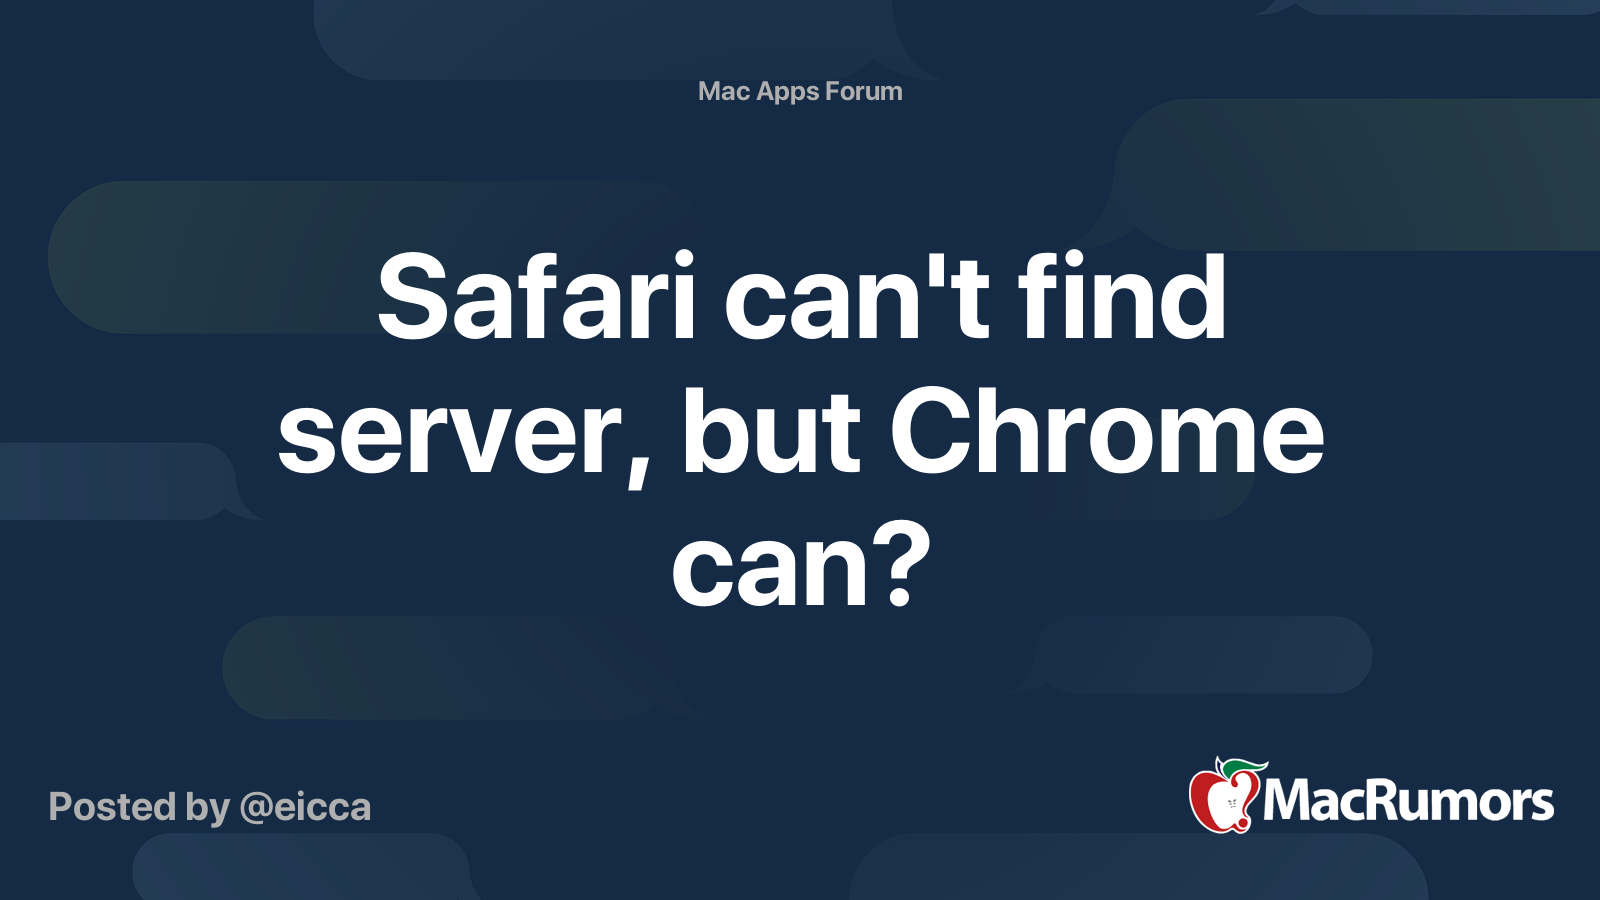 safari can't find server but chrome can